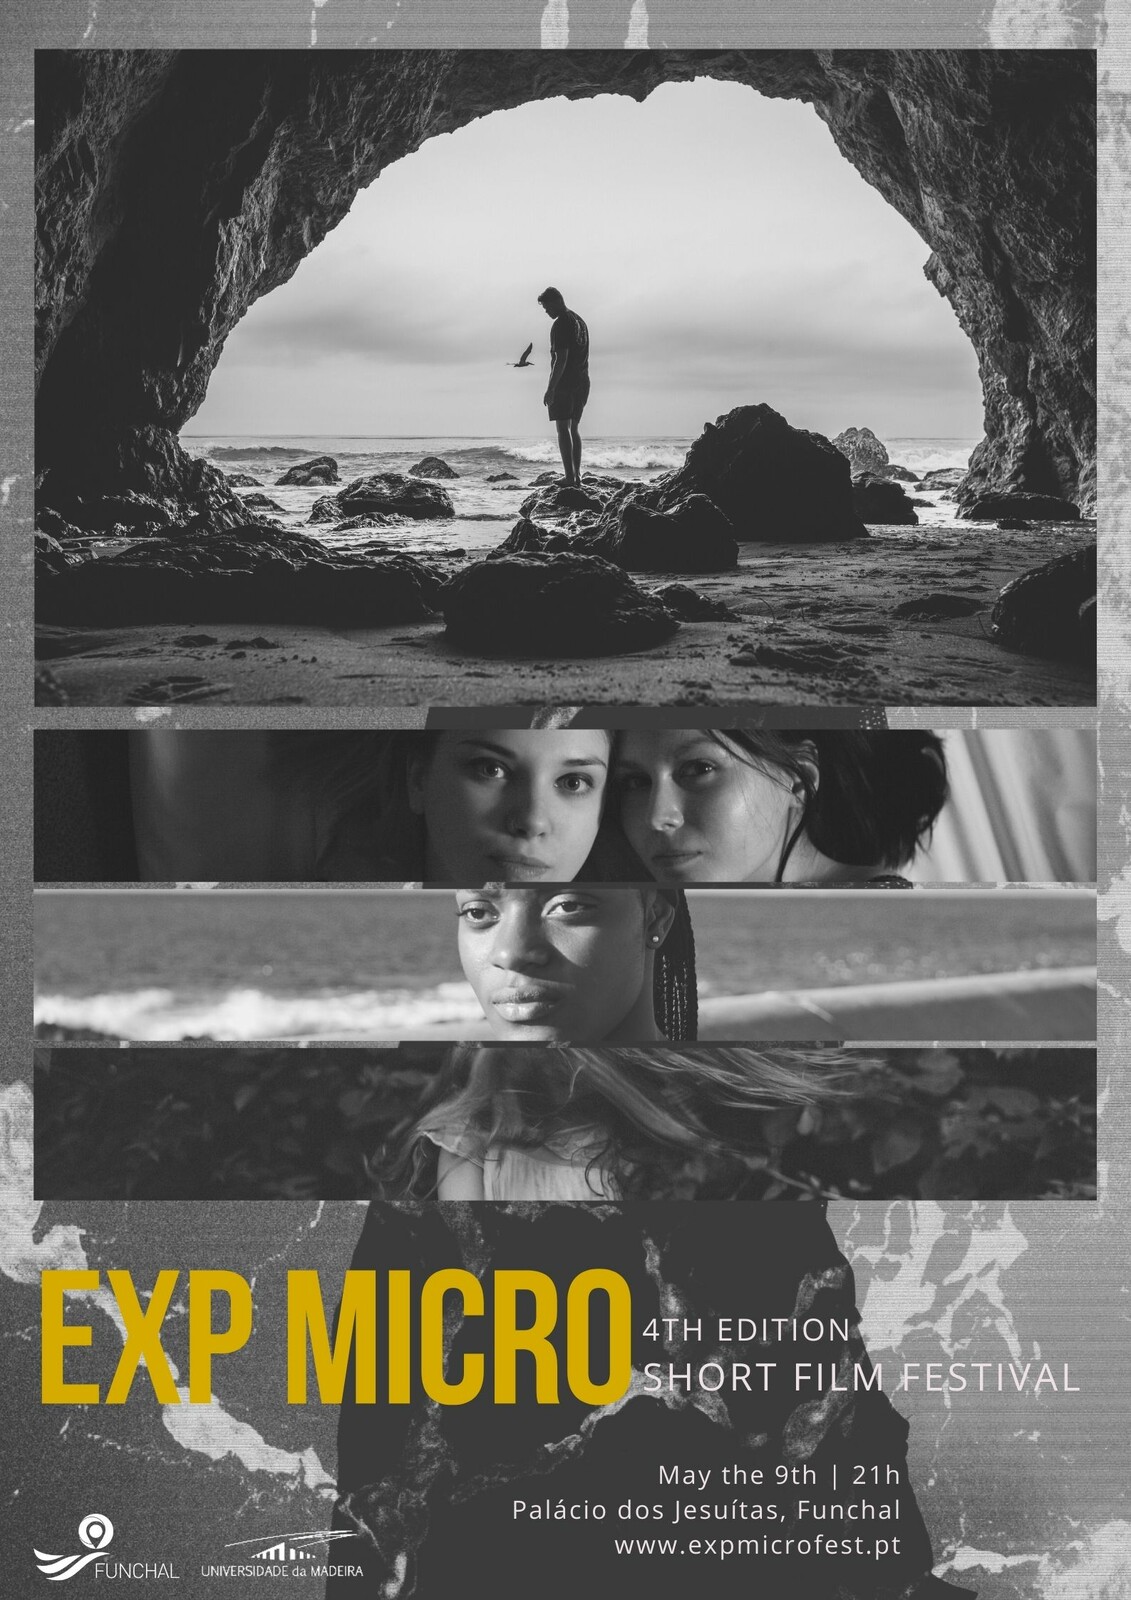 EXP MICRO FEST Poster, 4th Edition (2014)